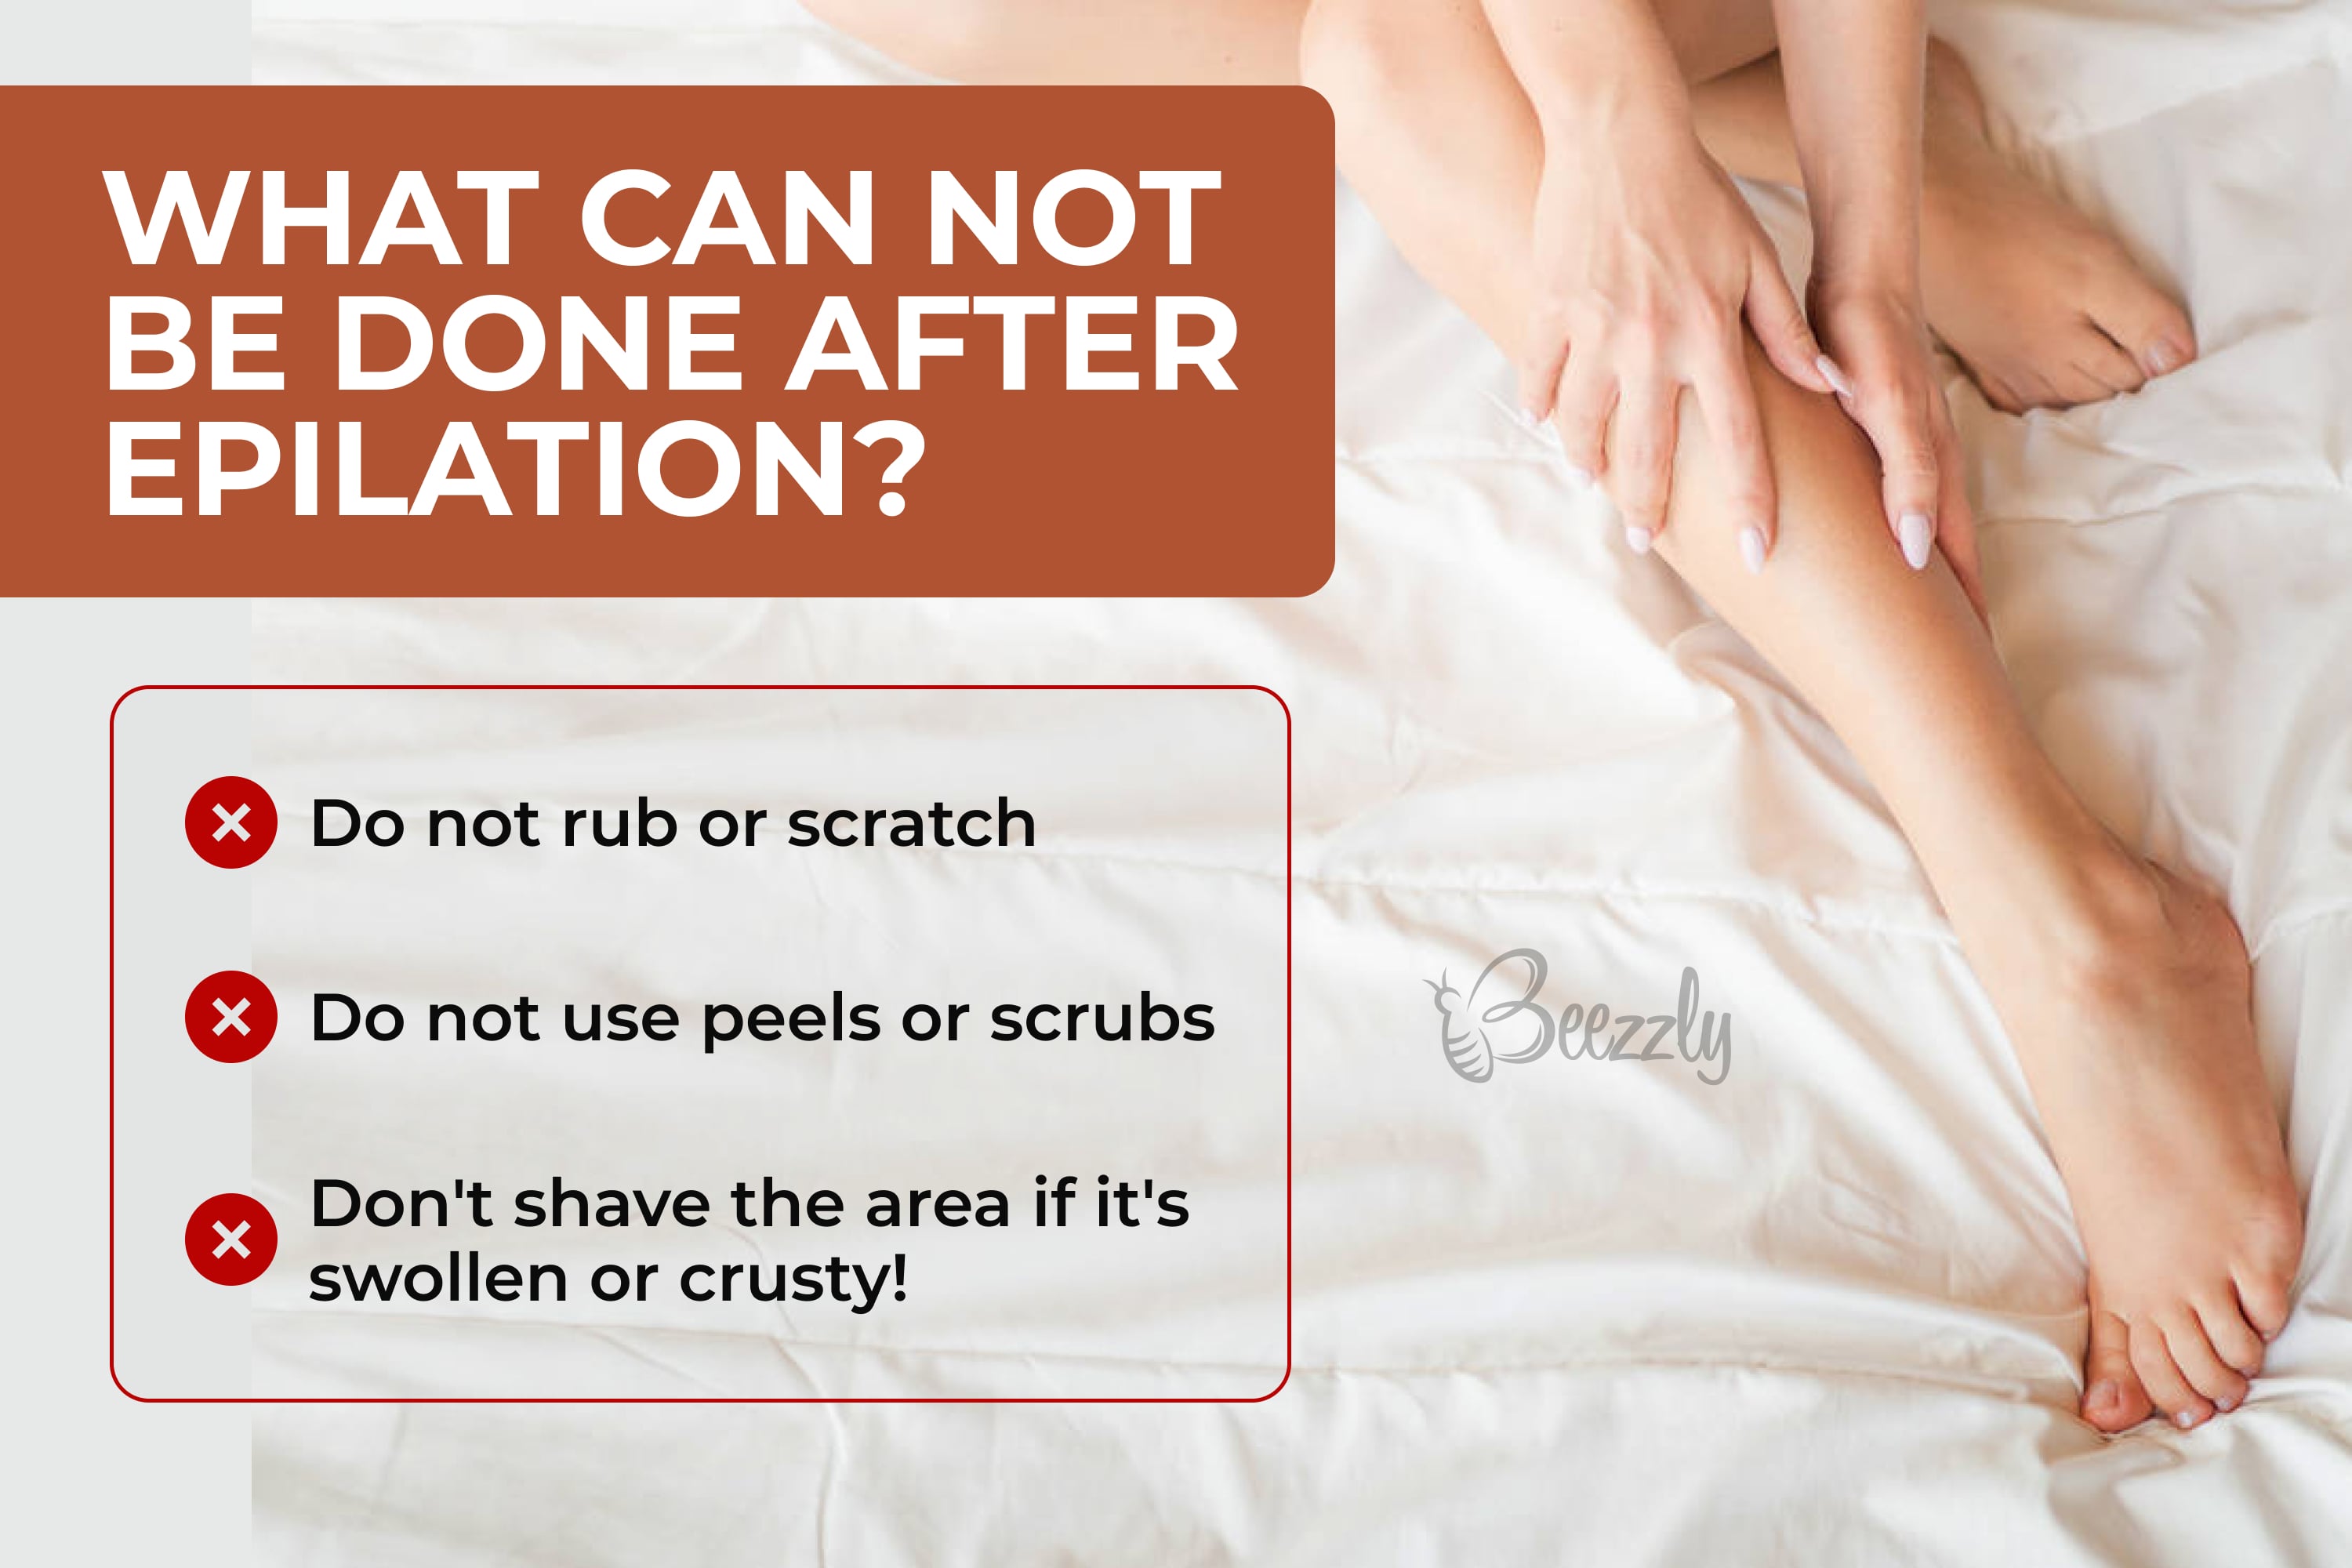 What can not be done after epilation